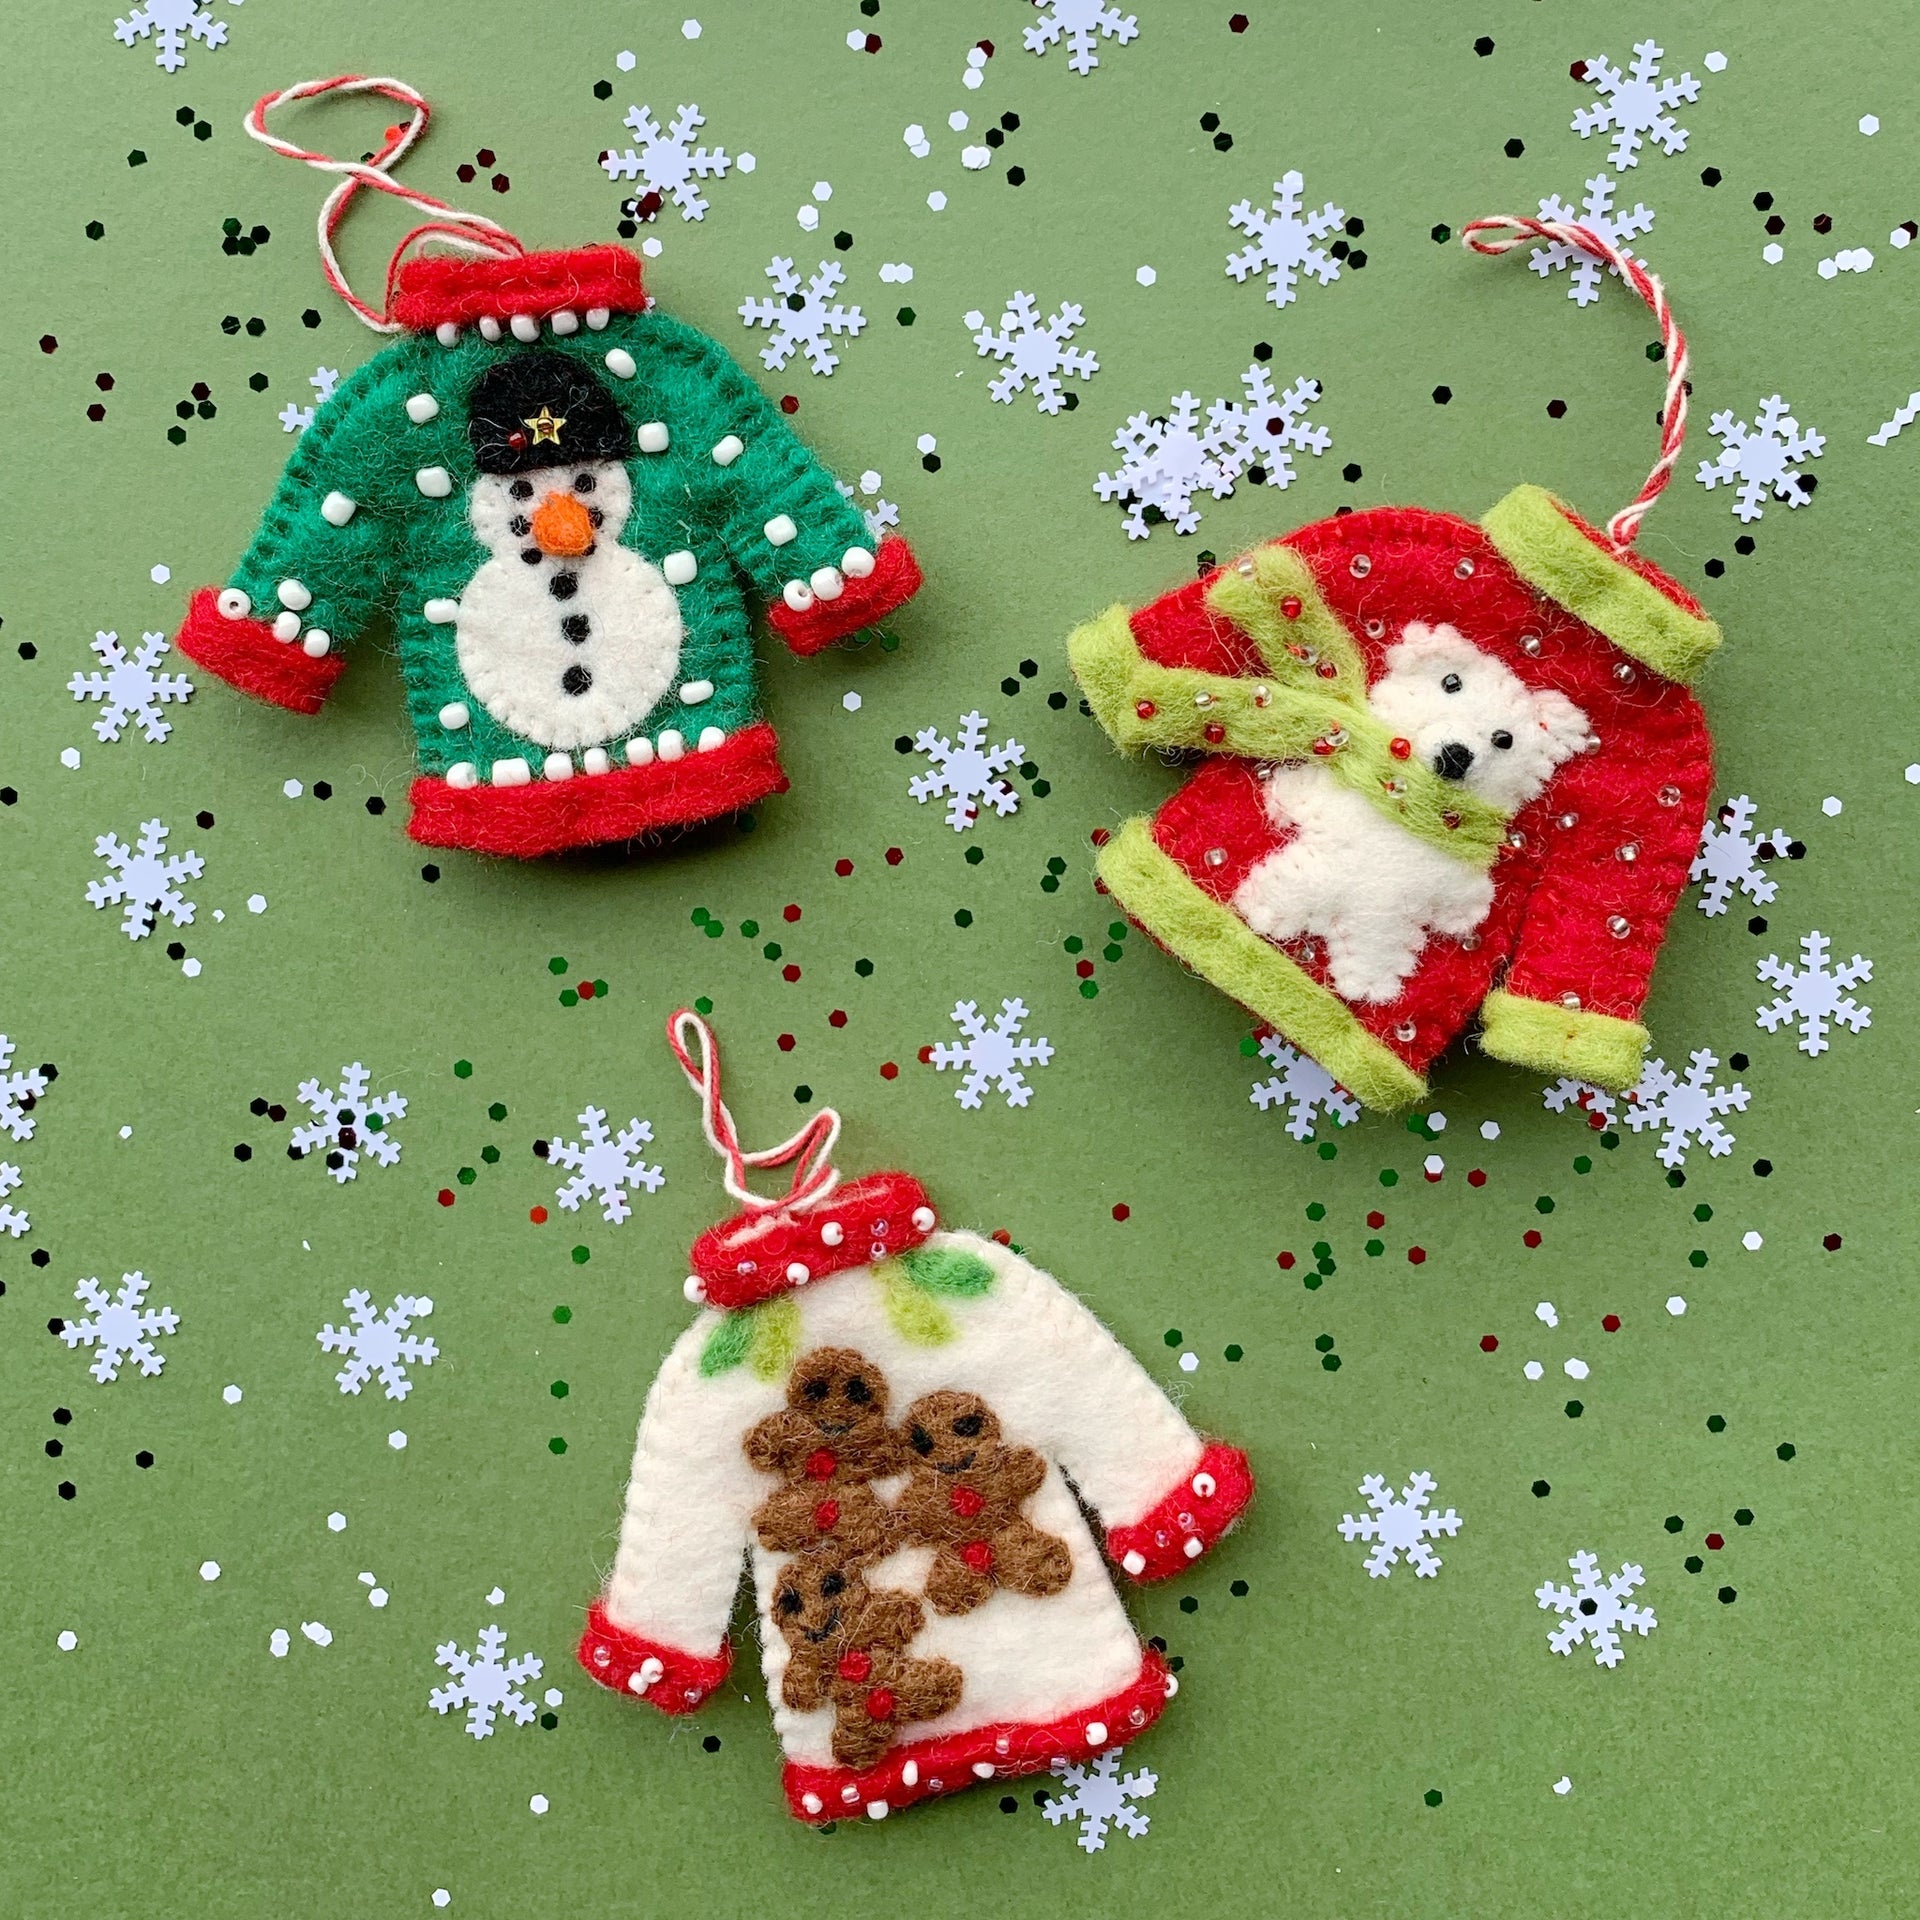 Cute set of Ugly Xmas Sweater Ornaments handmade in Nepal